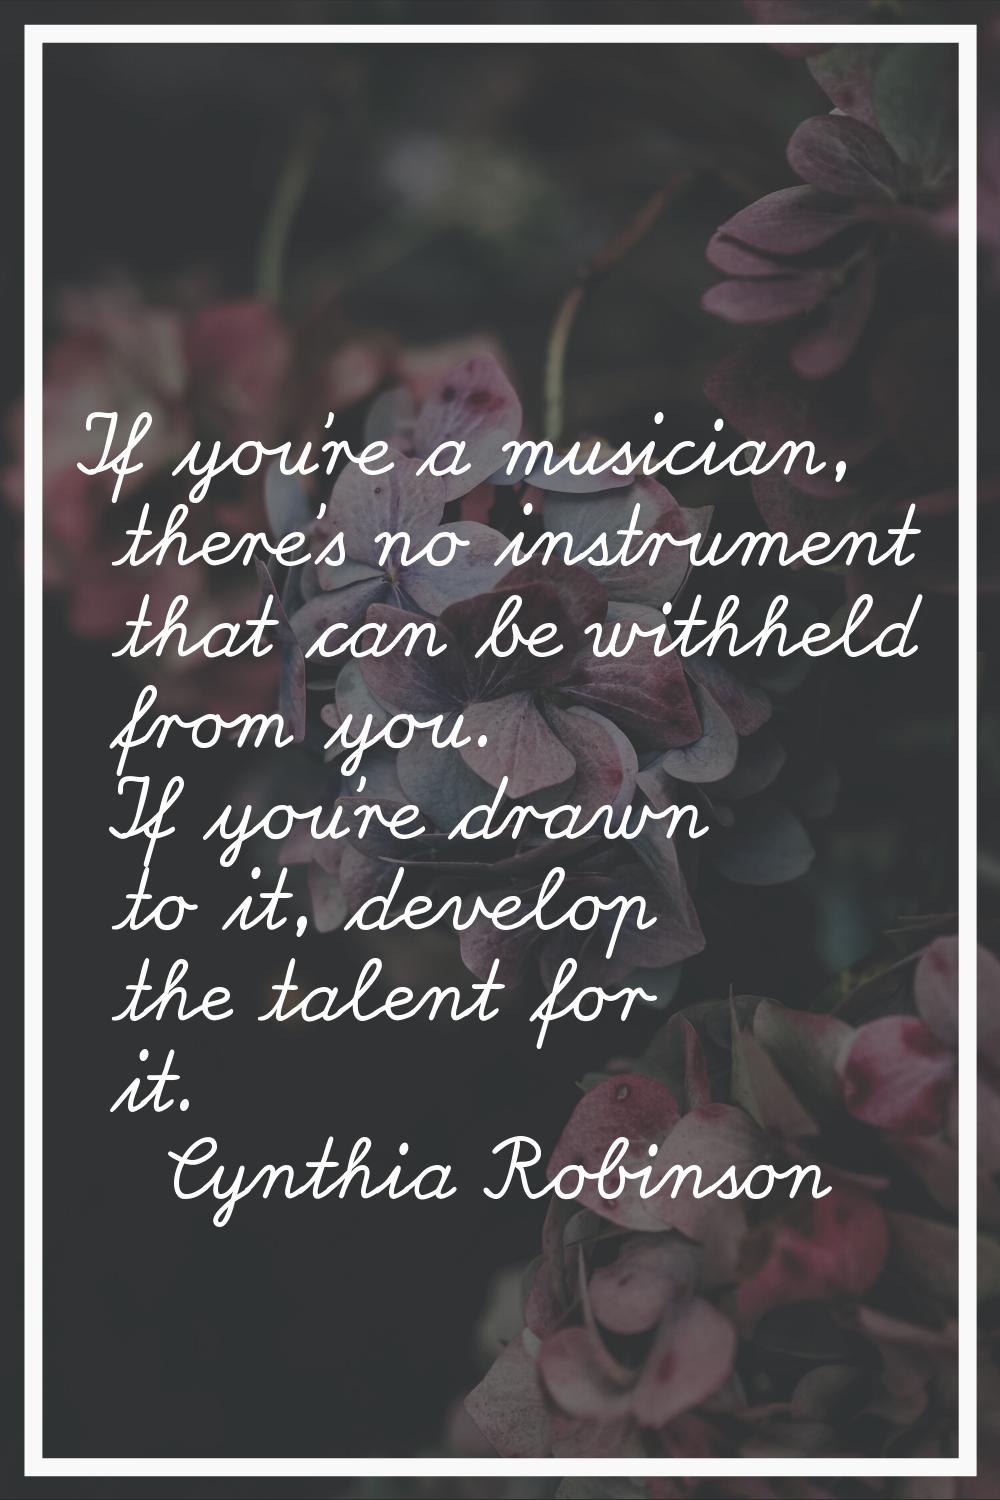 If you're a musician, there's no instrument that can be withheld from you. If you're drawn to it, d